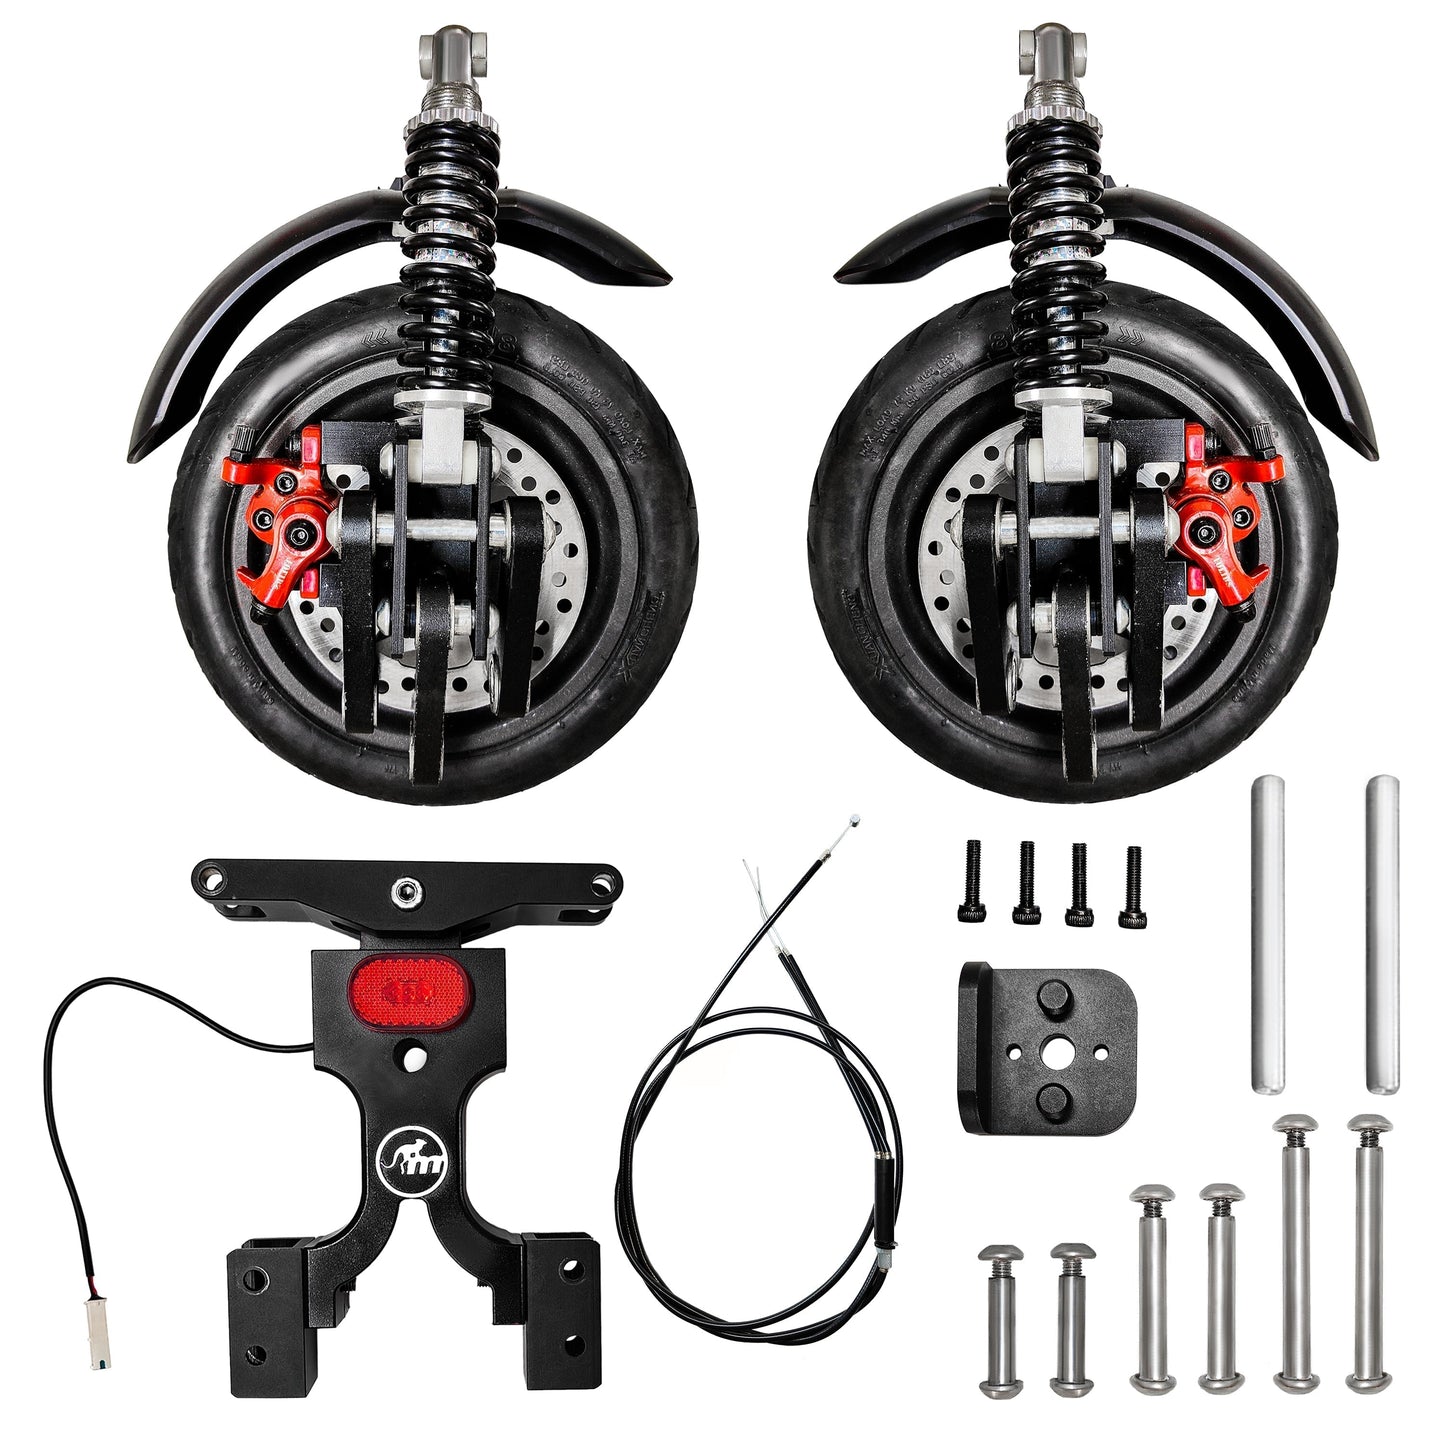 Monorim X3 upgrade kit to be Three wheels special for huffy H300 frames